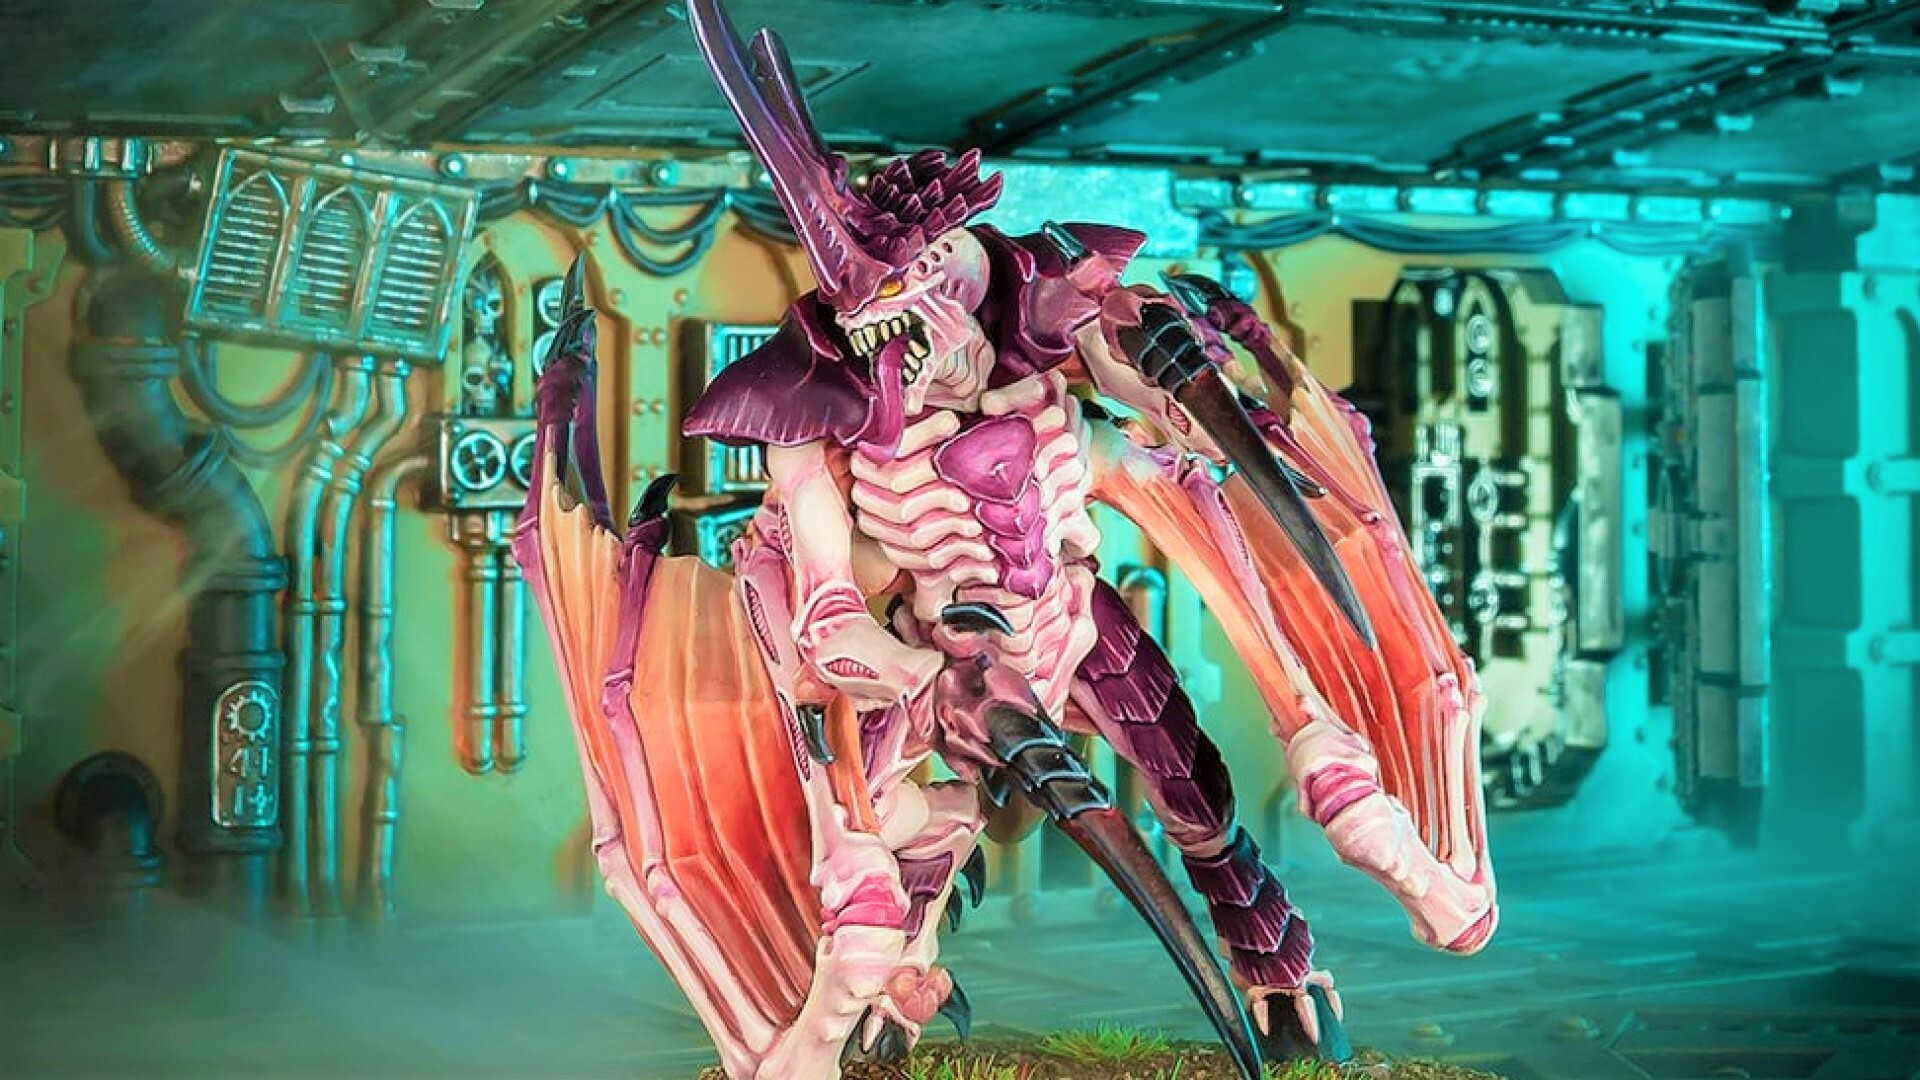 Winged Tyranid Prime soars into Warhammer 40k 10th edition